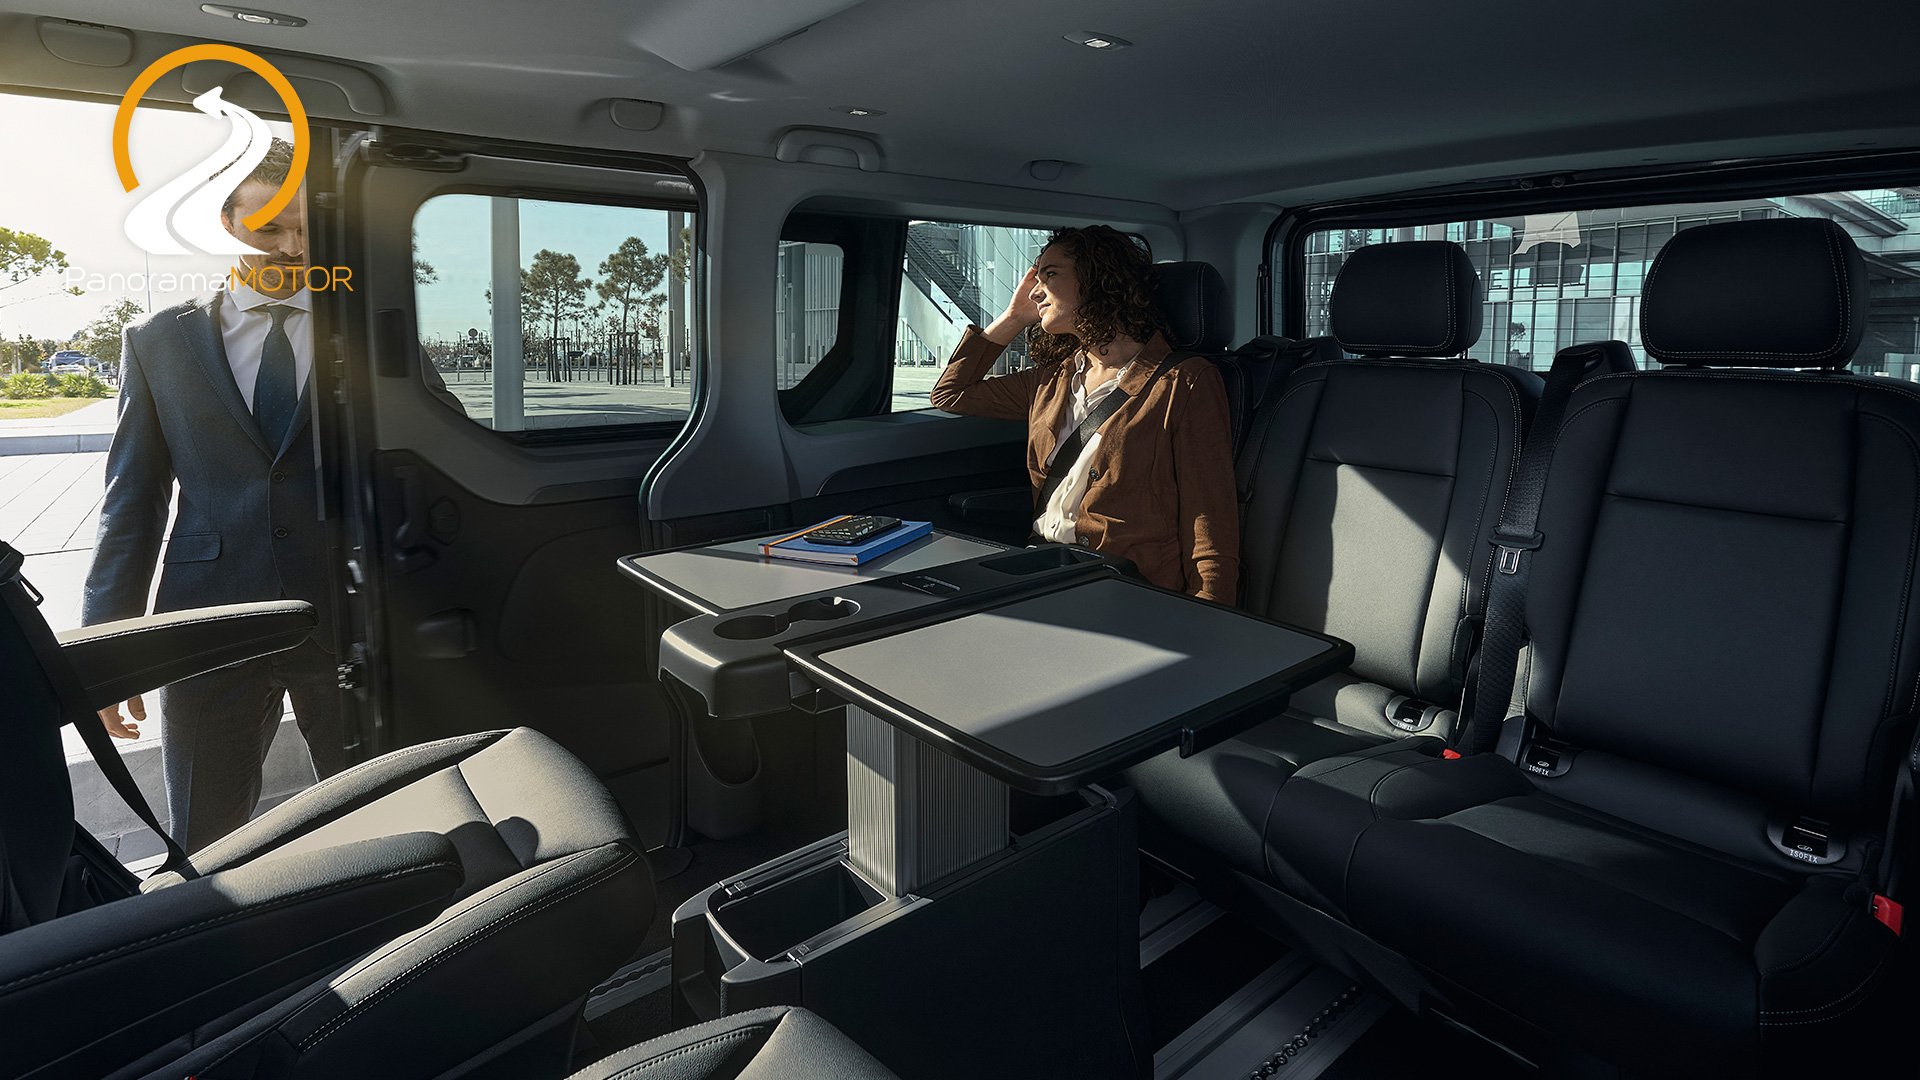 Renault Trafic SpaceClass 2021